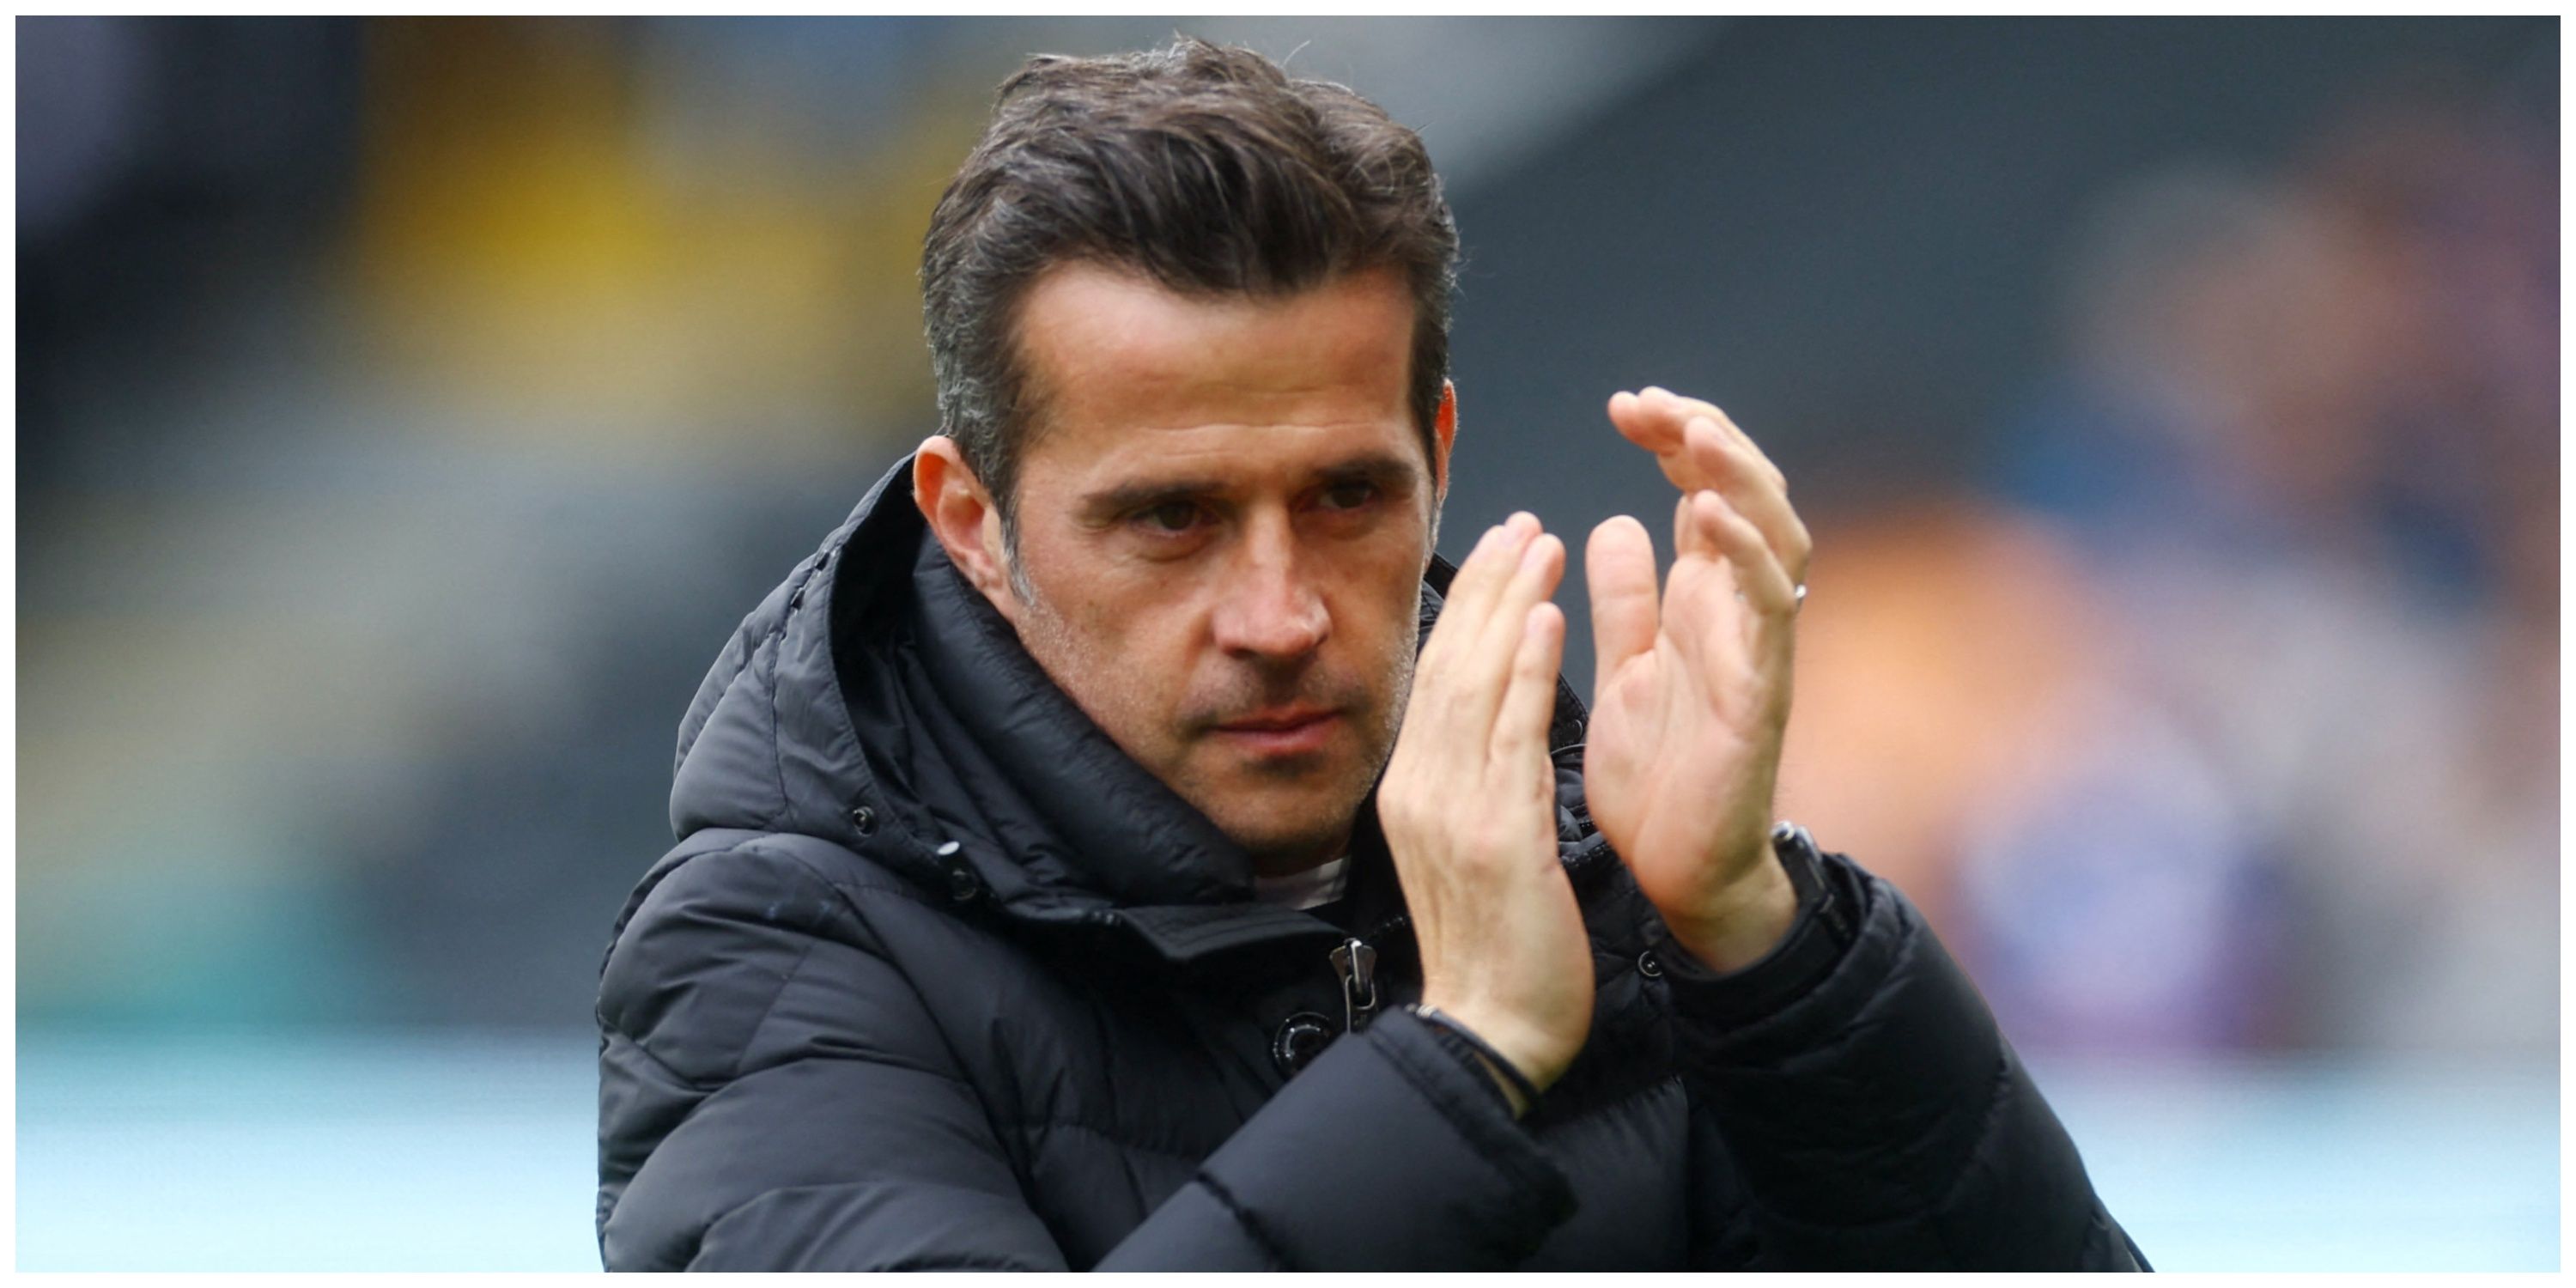 Fulham manager Marco Silva clapping